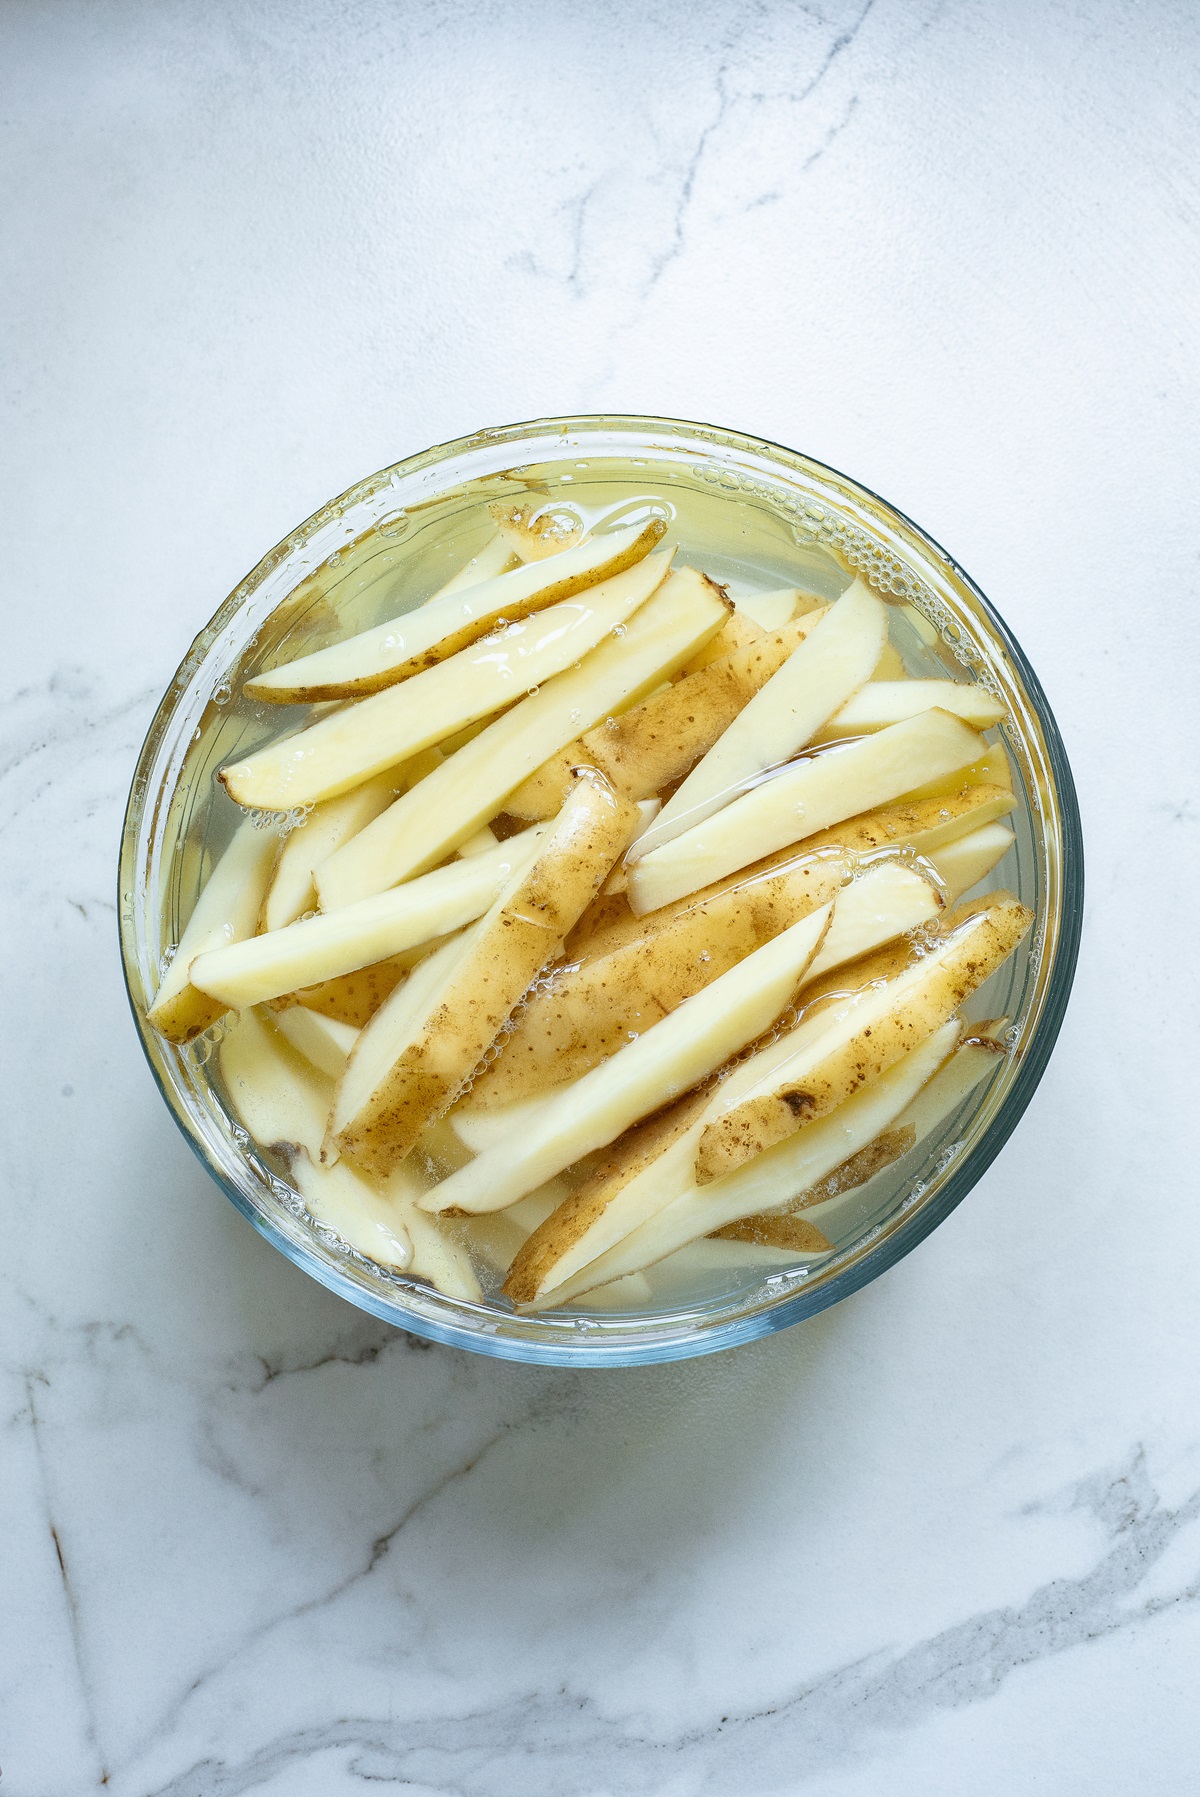 Potatoes sliced and in water.